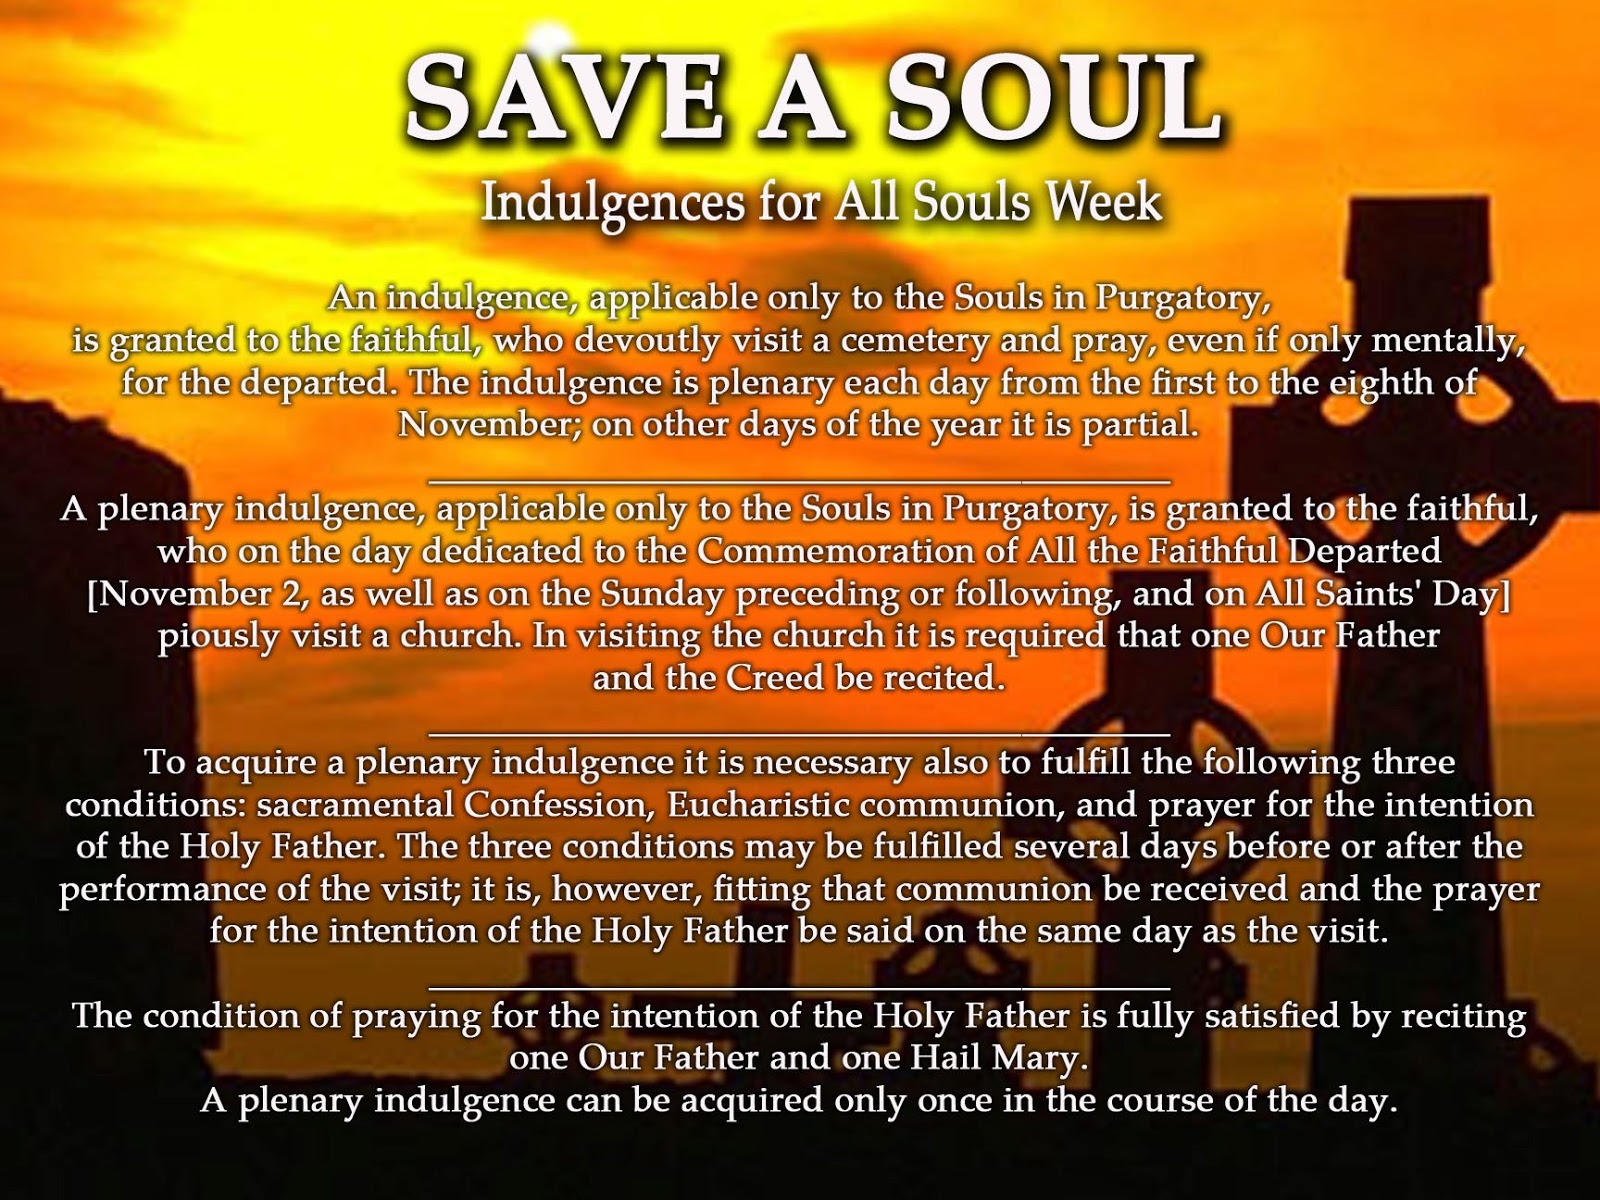 national-shrine-of-the-sacred-heart-save-a-soul-indulgences-for-all